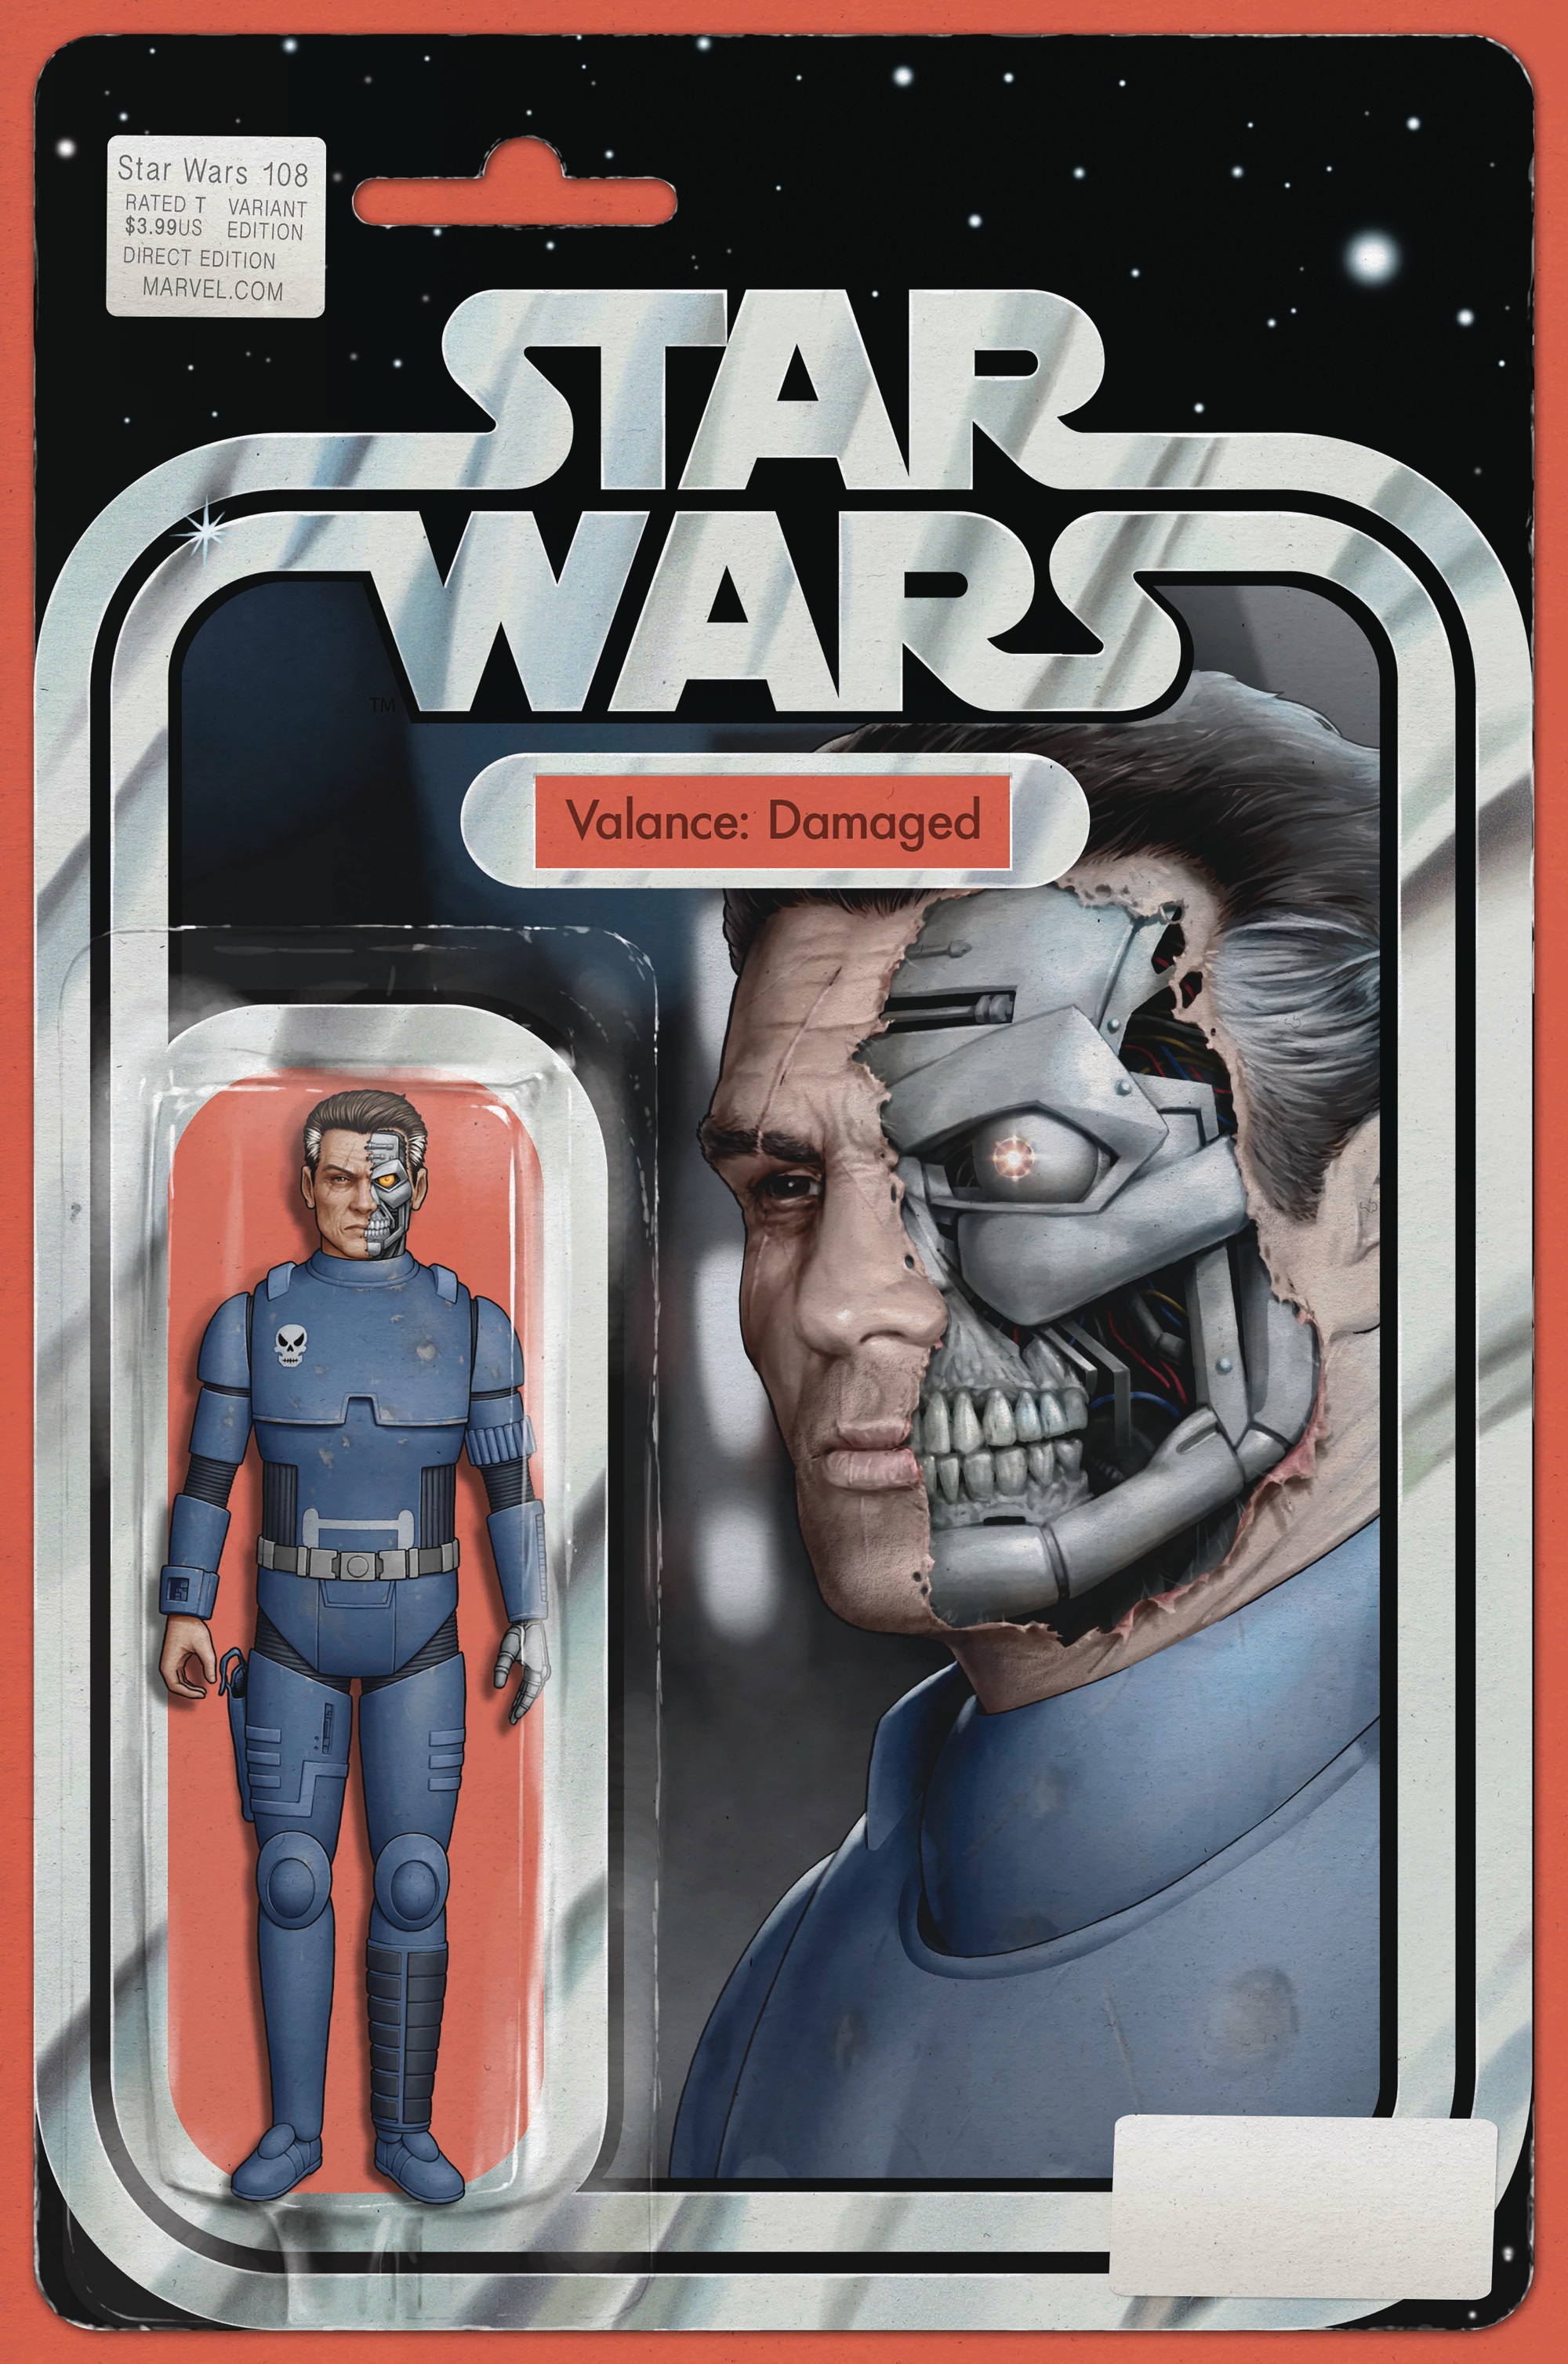 Star Wars #108 (Action Figure Variant Cover) (29.05.2019)